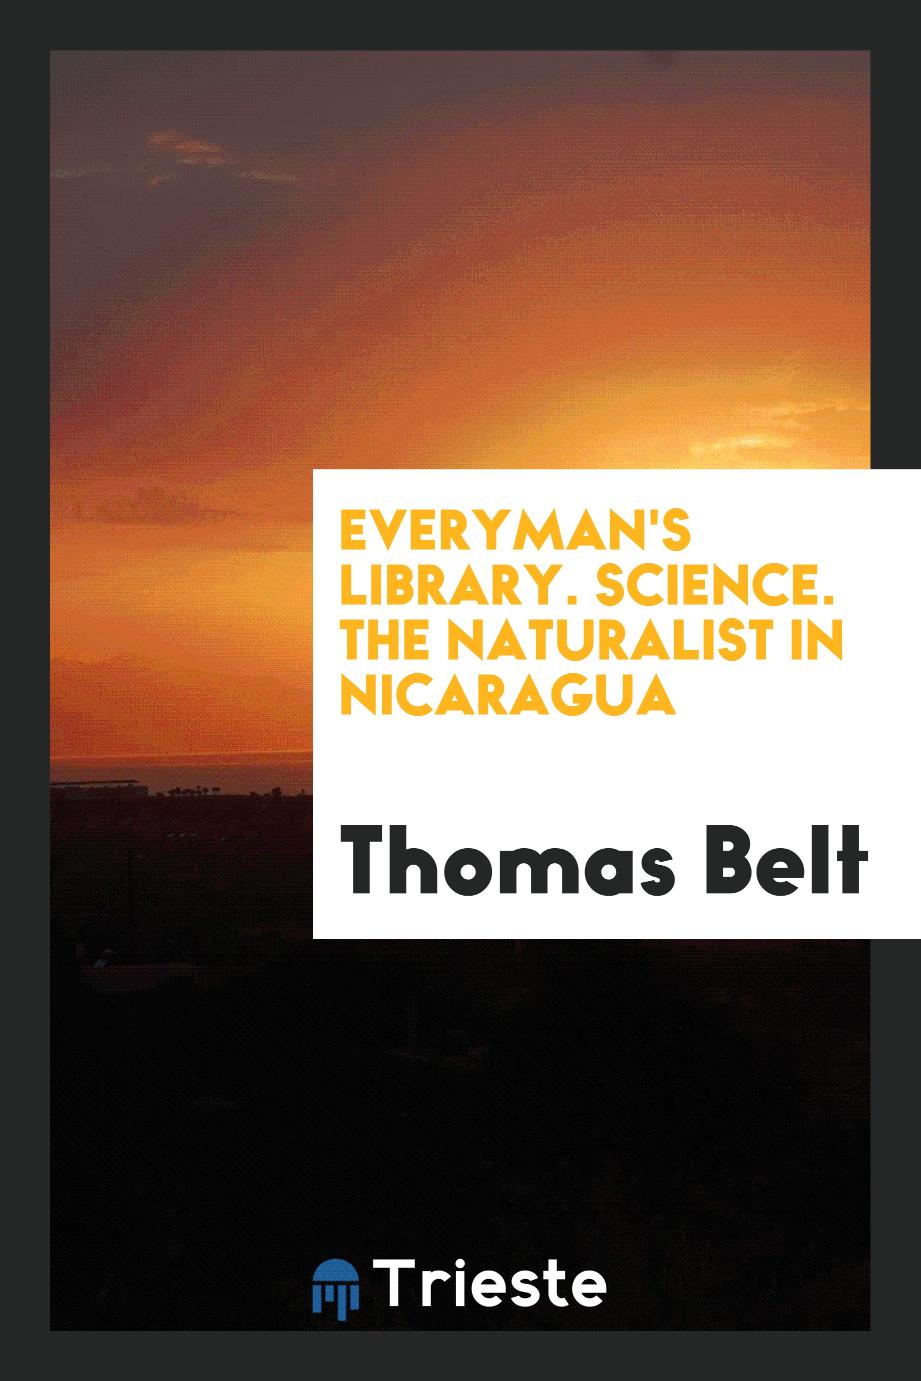 Everyman's Library. Science. The Naturalist in Nicaragua